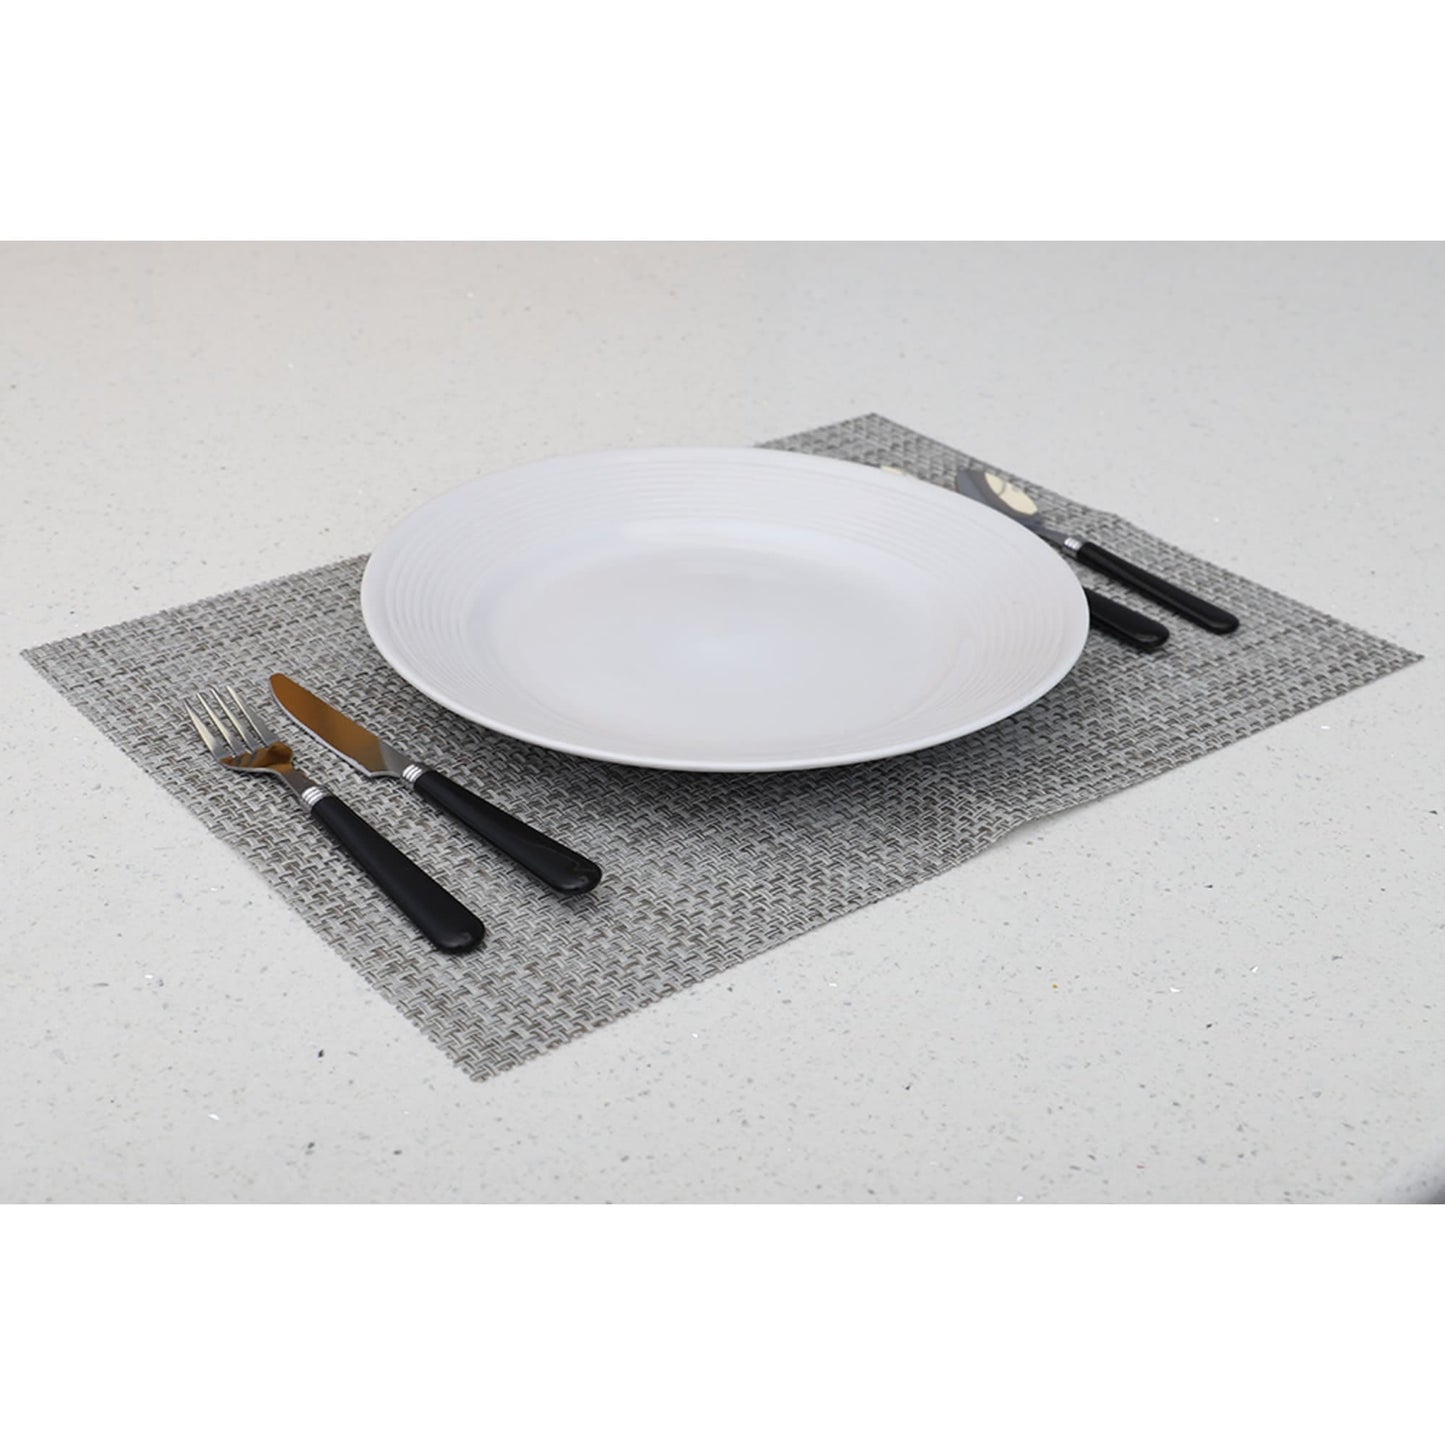 16 Piece Stainless Steel with Plastic Handles